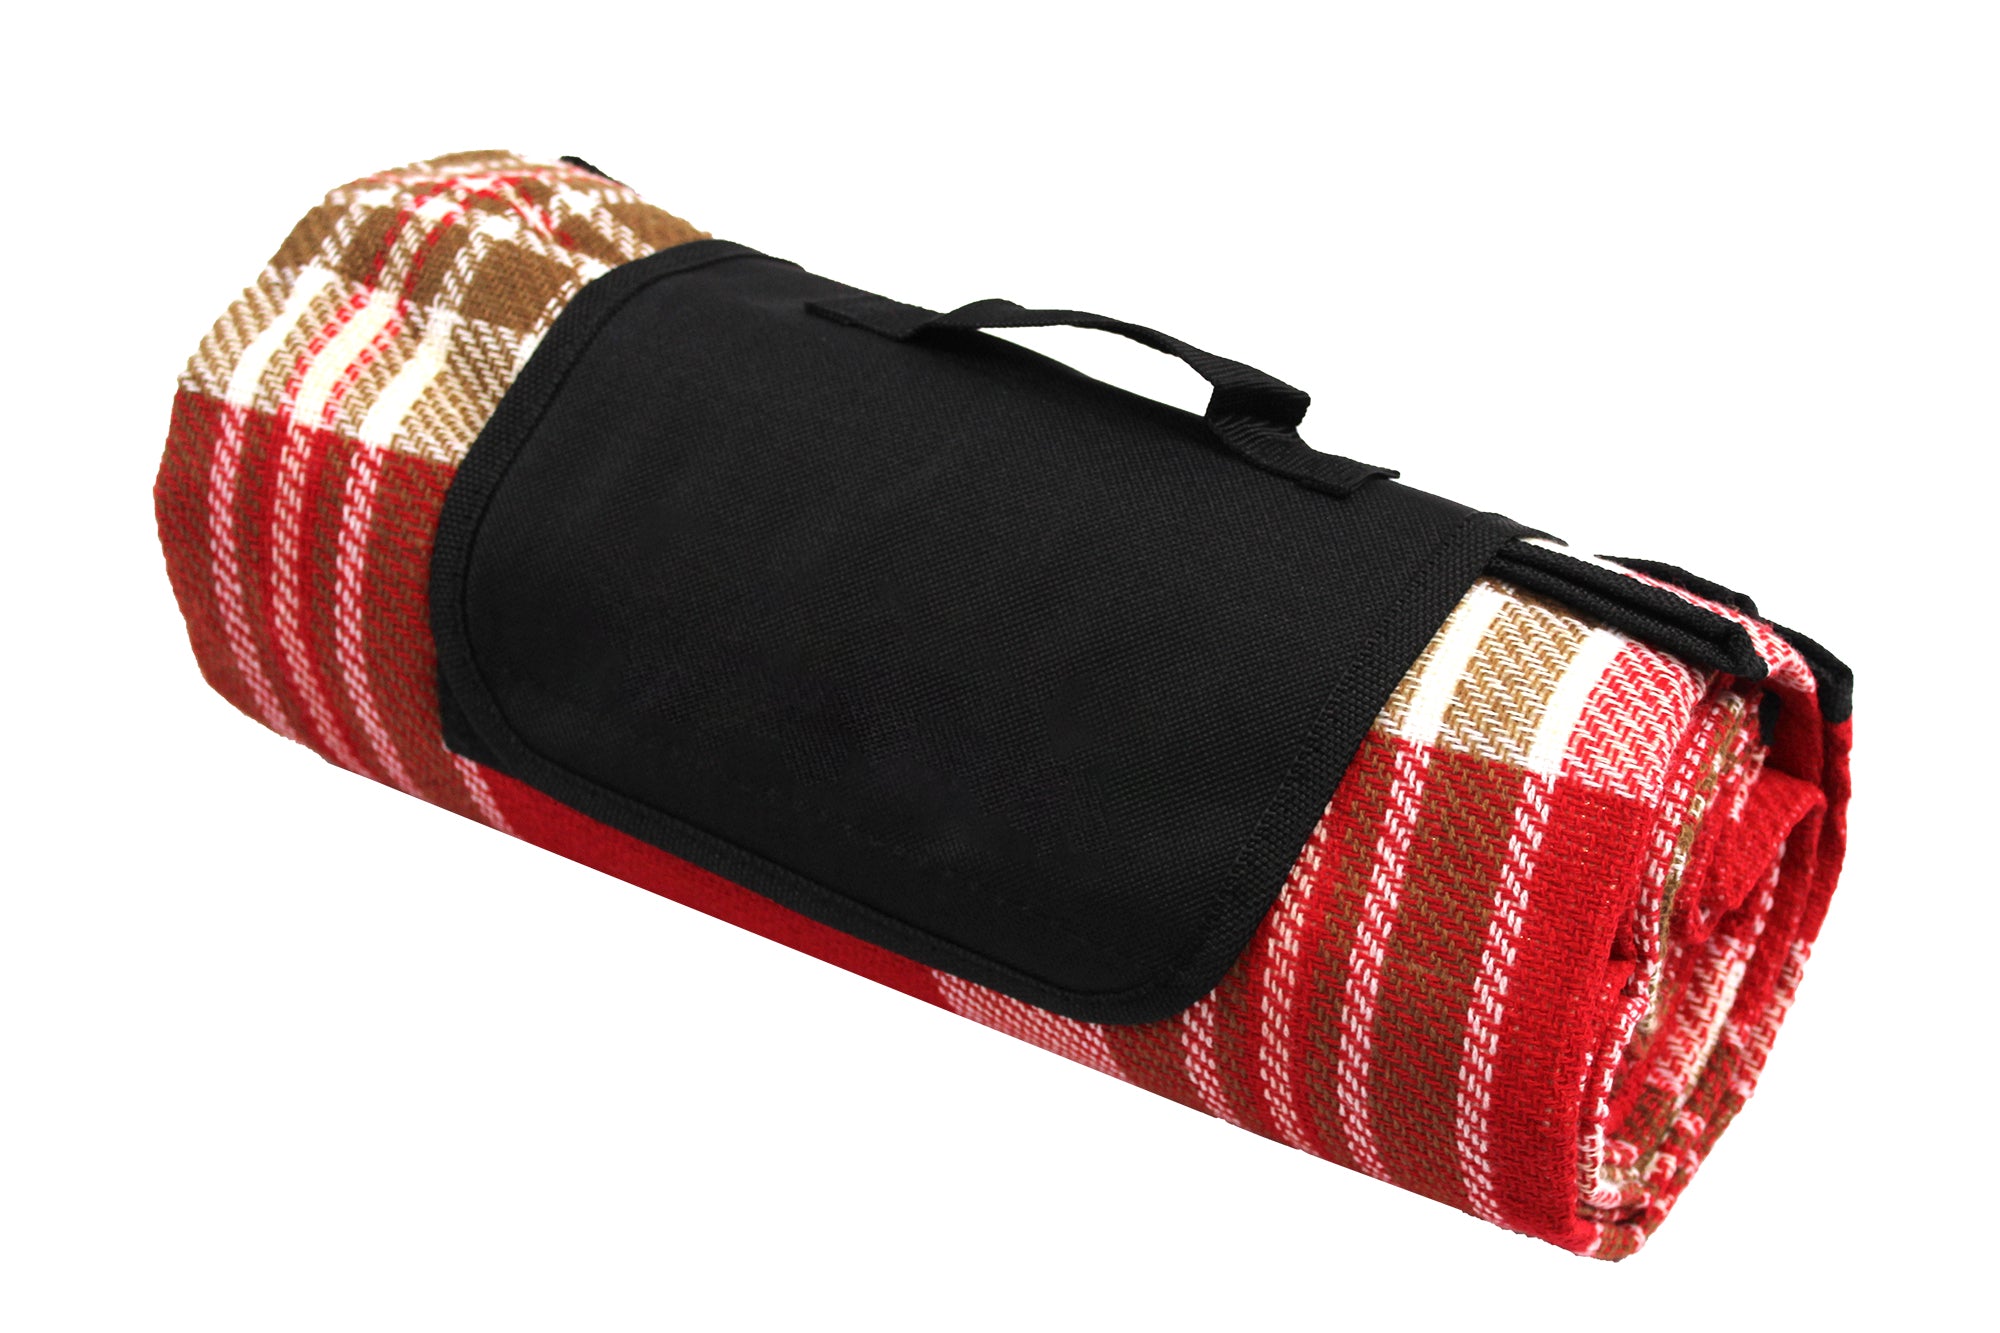 Picnic Blanket & Camping Mat with Waterproof Foil Under